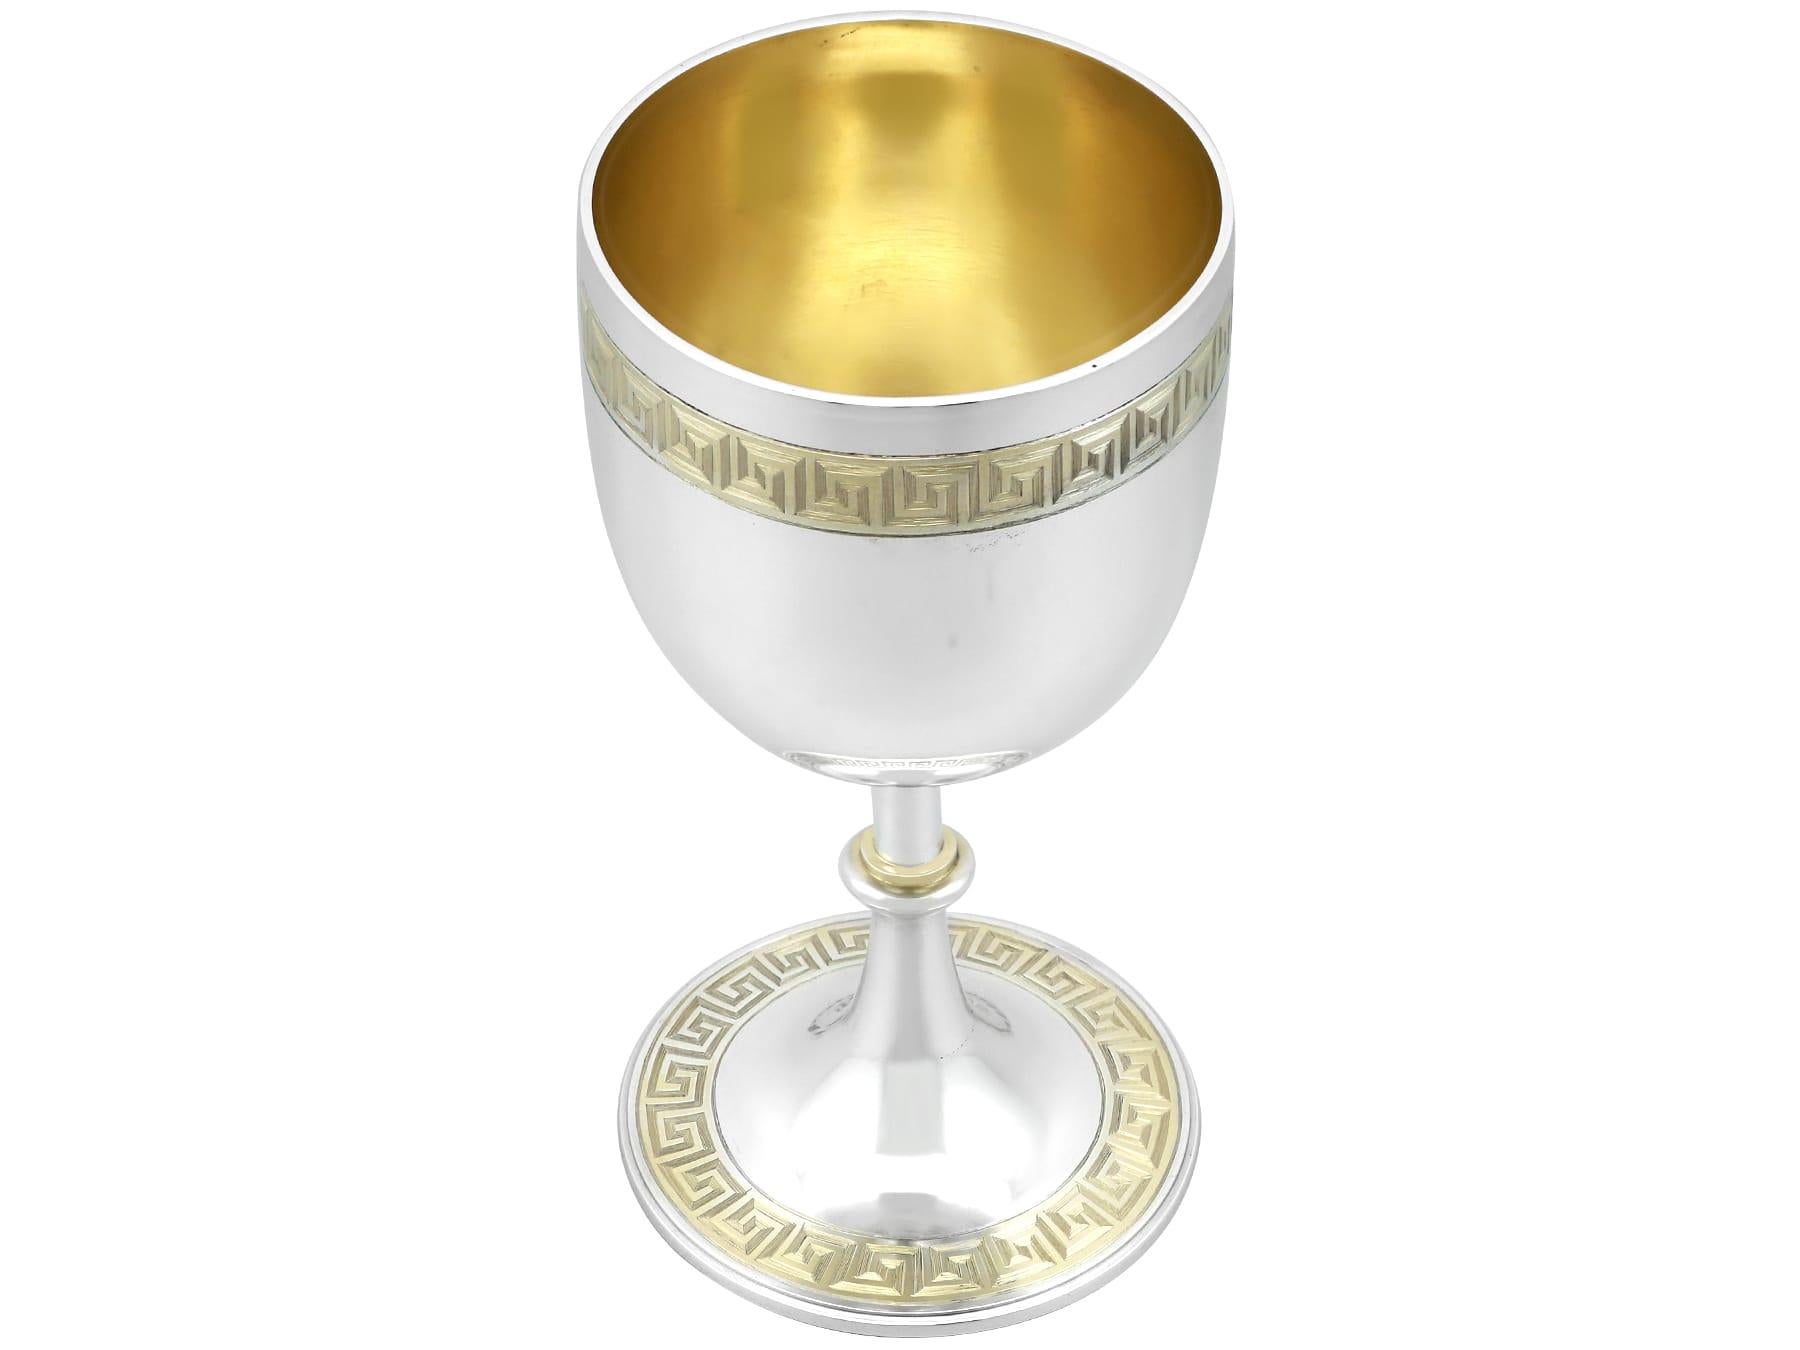 An exceptional, fine and impressive antique Victorian sterling silver parcel gilt goblet; an addition to our London silver wine and drinks related silverware collection.

This exceptional antique Victorian London sterling silver goblet has a